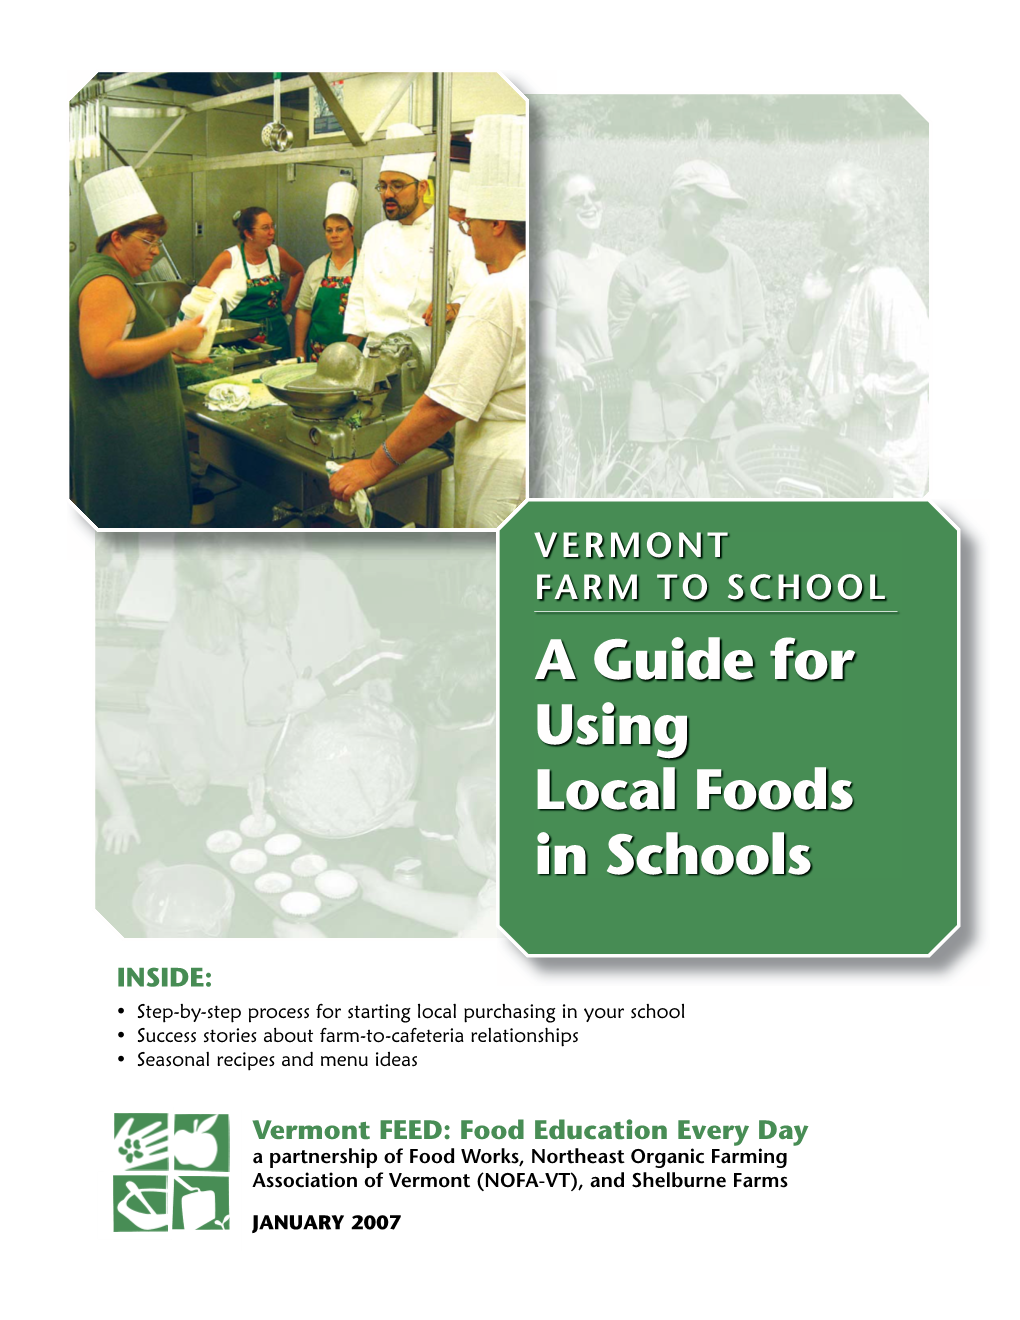 A Guide for Using Local Foods in Schools